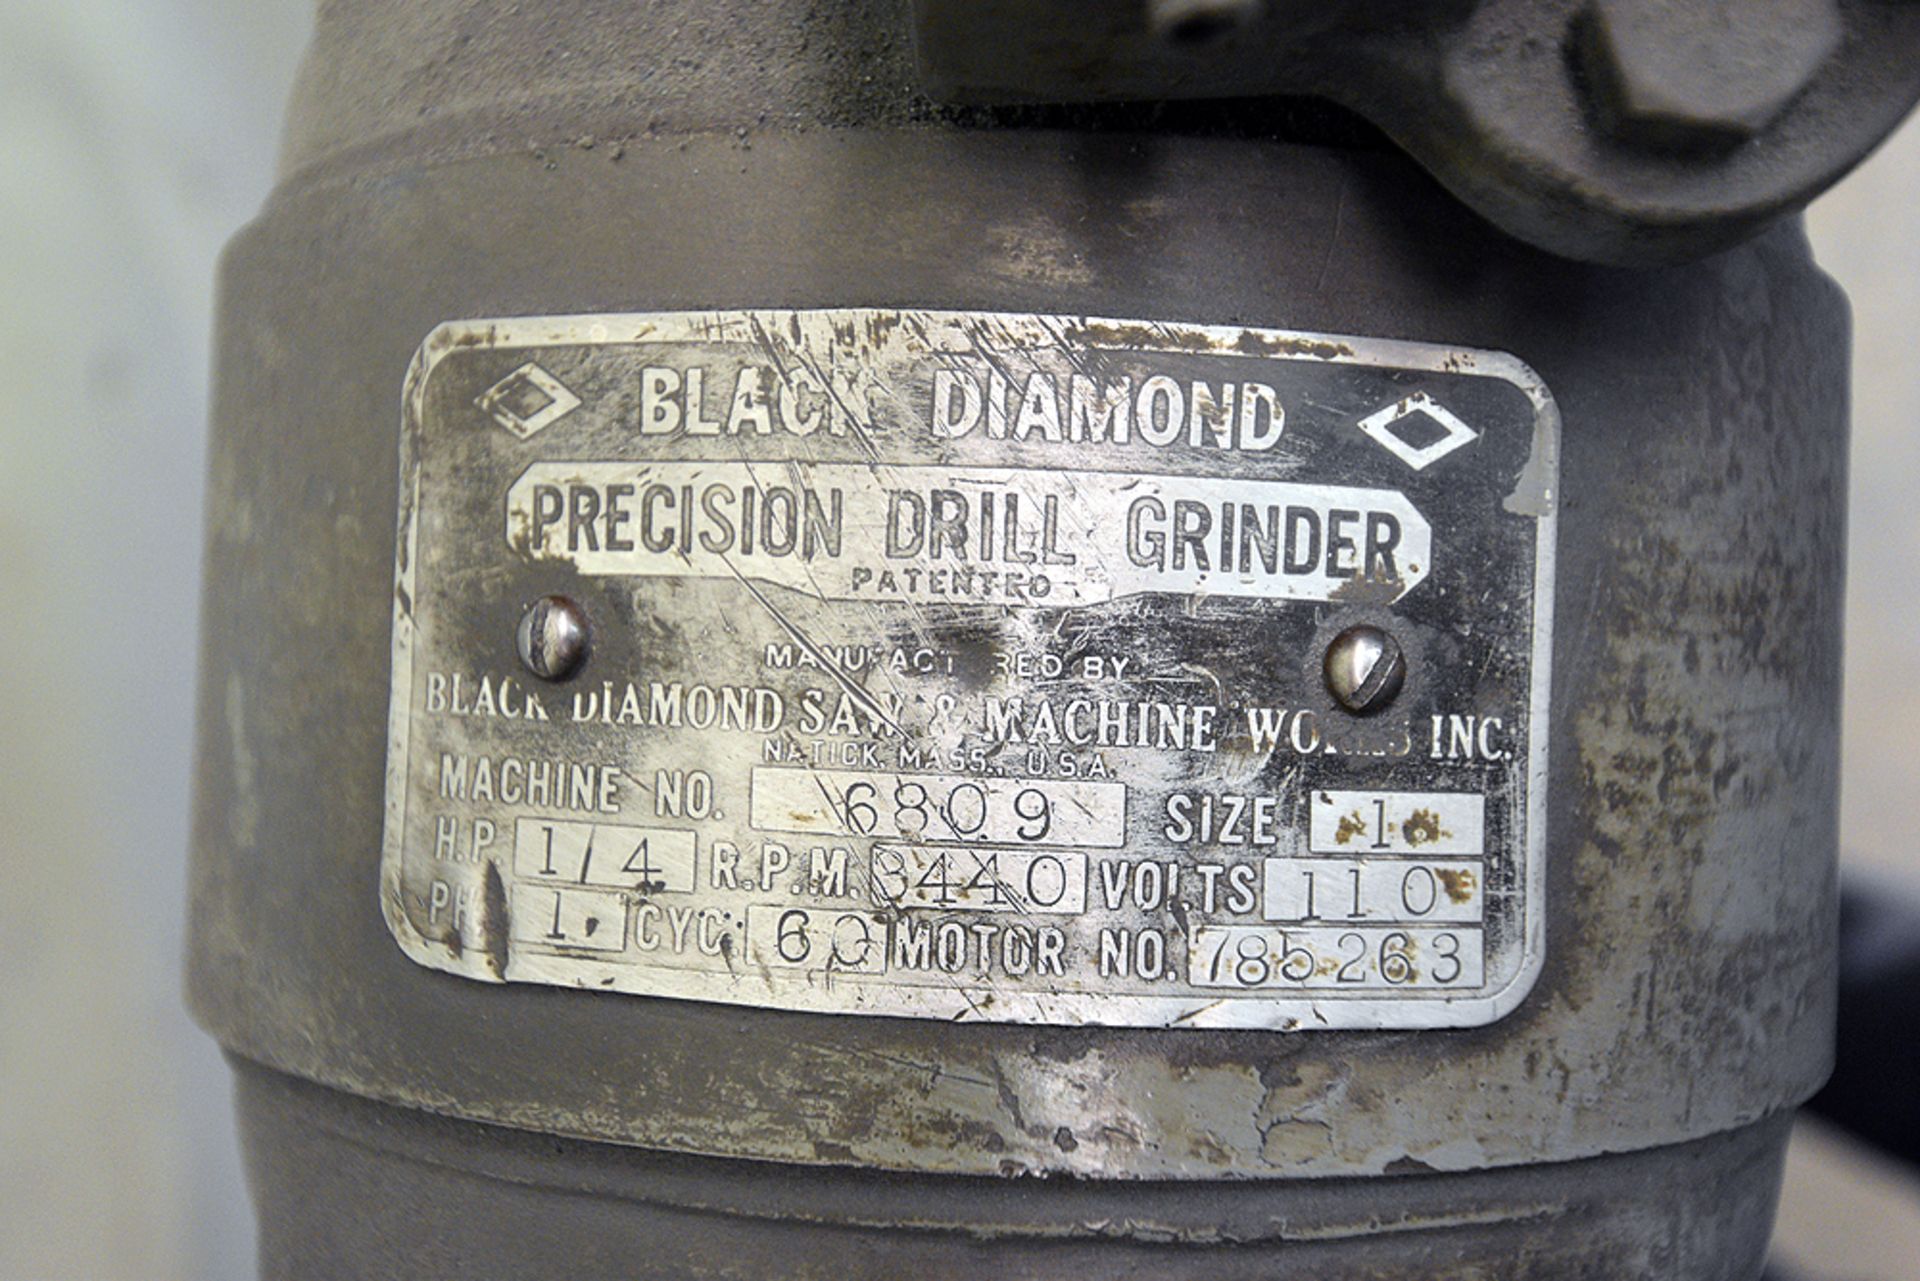 Black Diamond Precision Drill Grinder, Machine Number: 6809, 110v, Single Phase, 1/2hp w/ Stand - Image 4 of 4